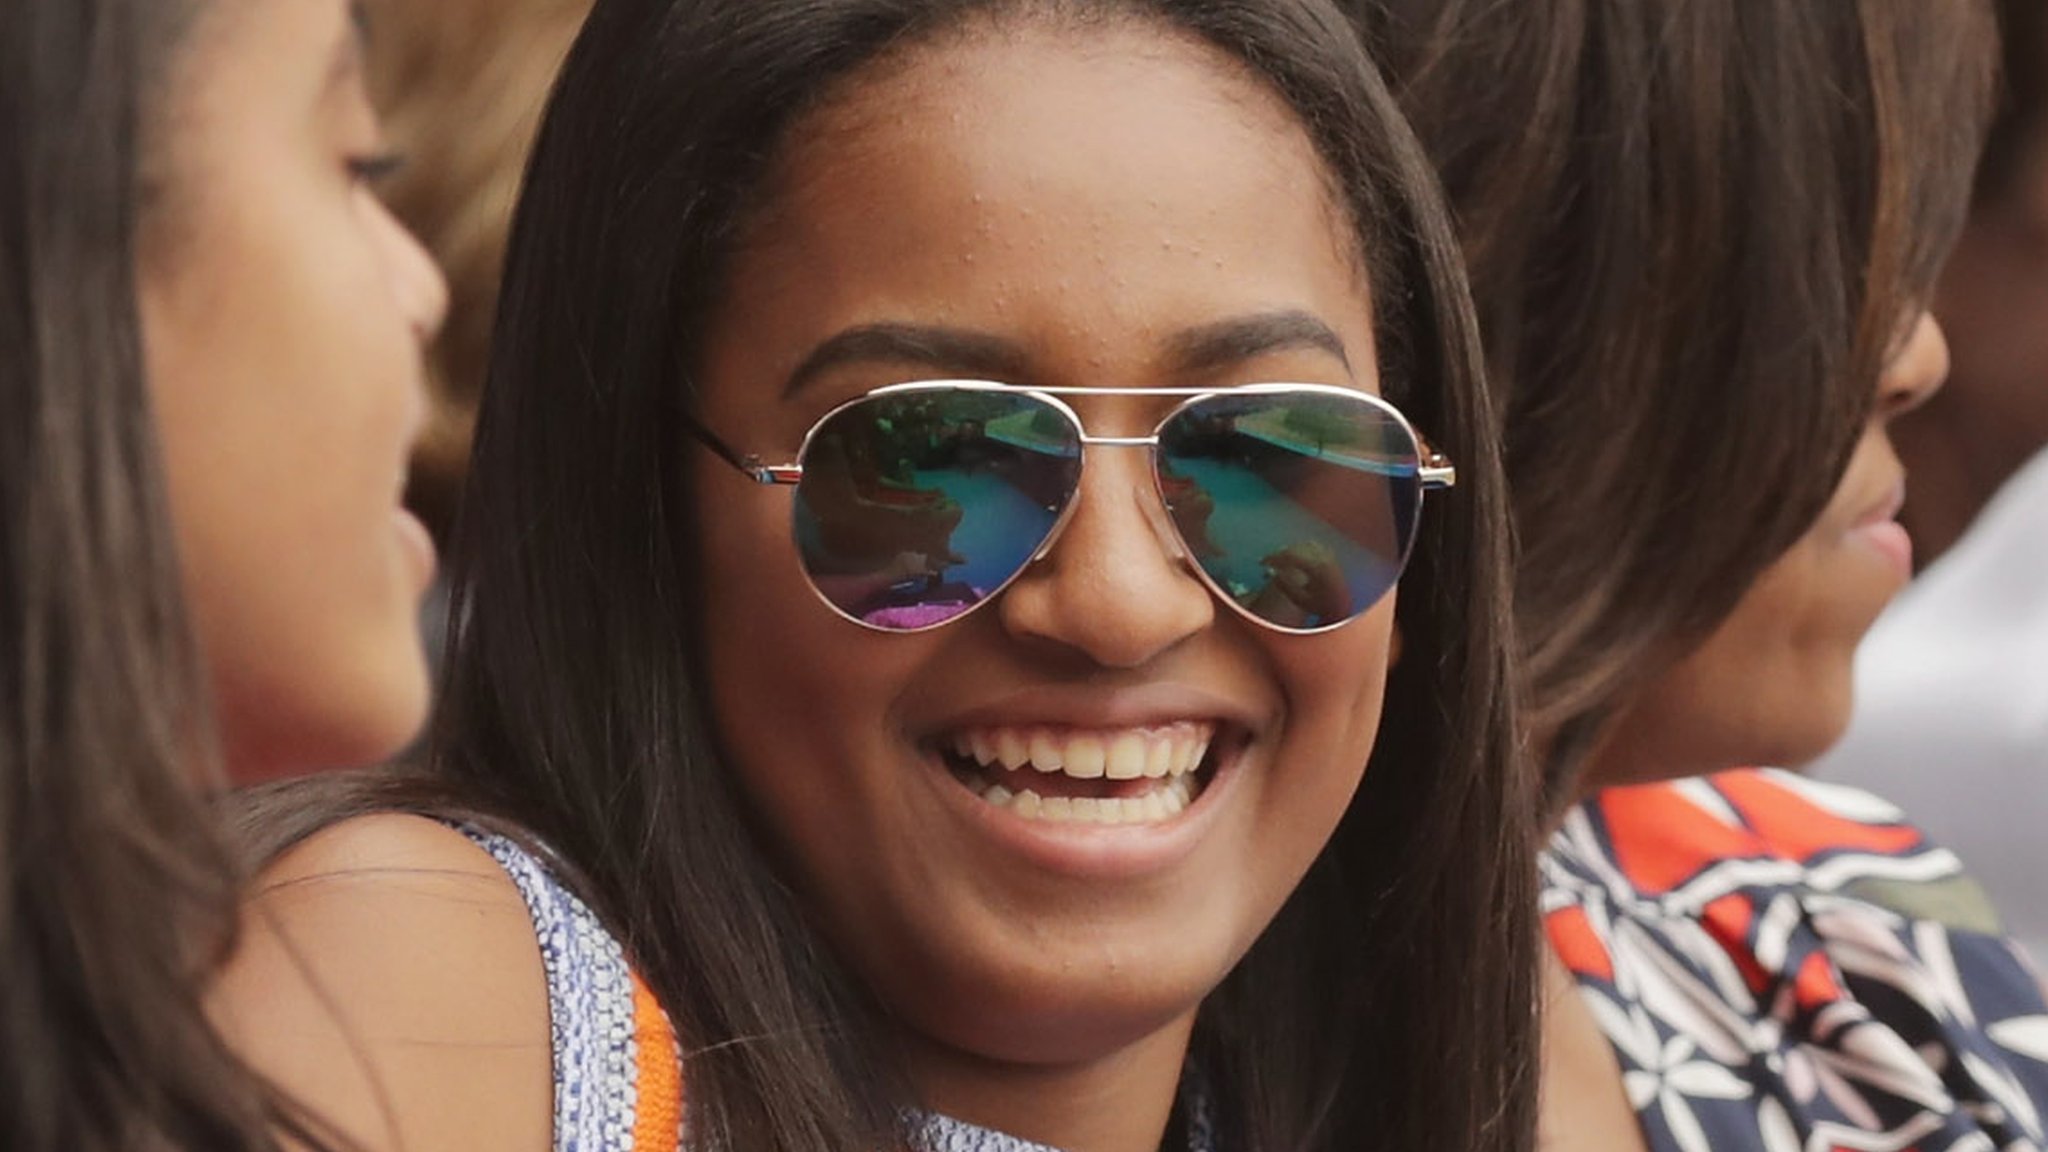 Sasha Obama’s TikTok Video Of Profanity-Laced Song Sparks Controversy